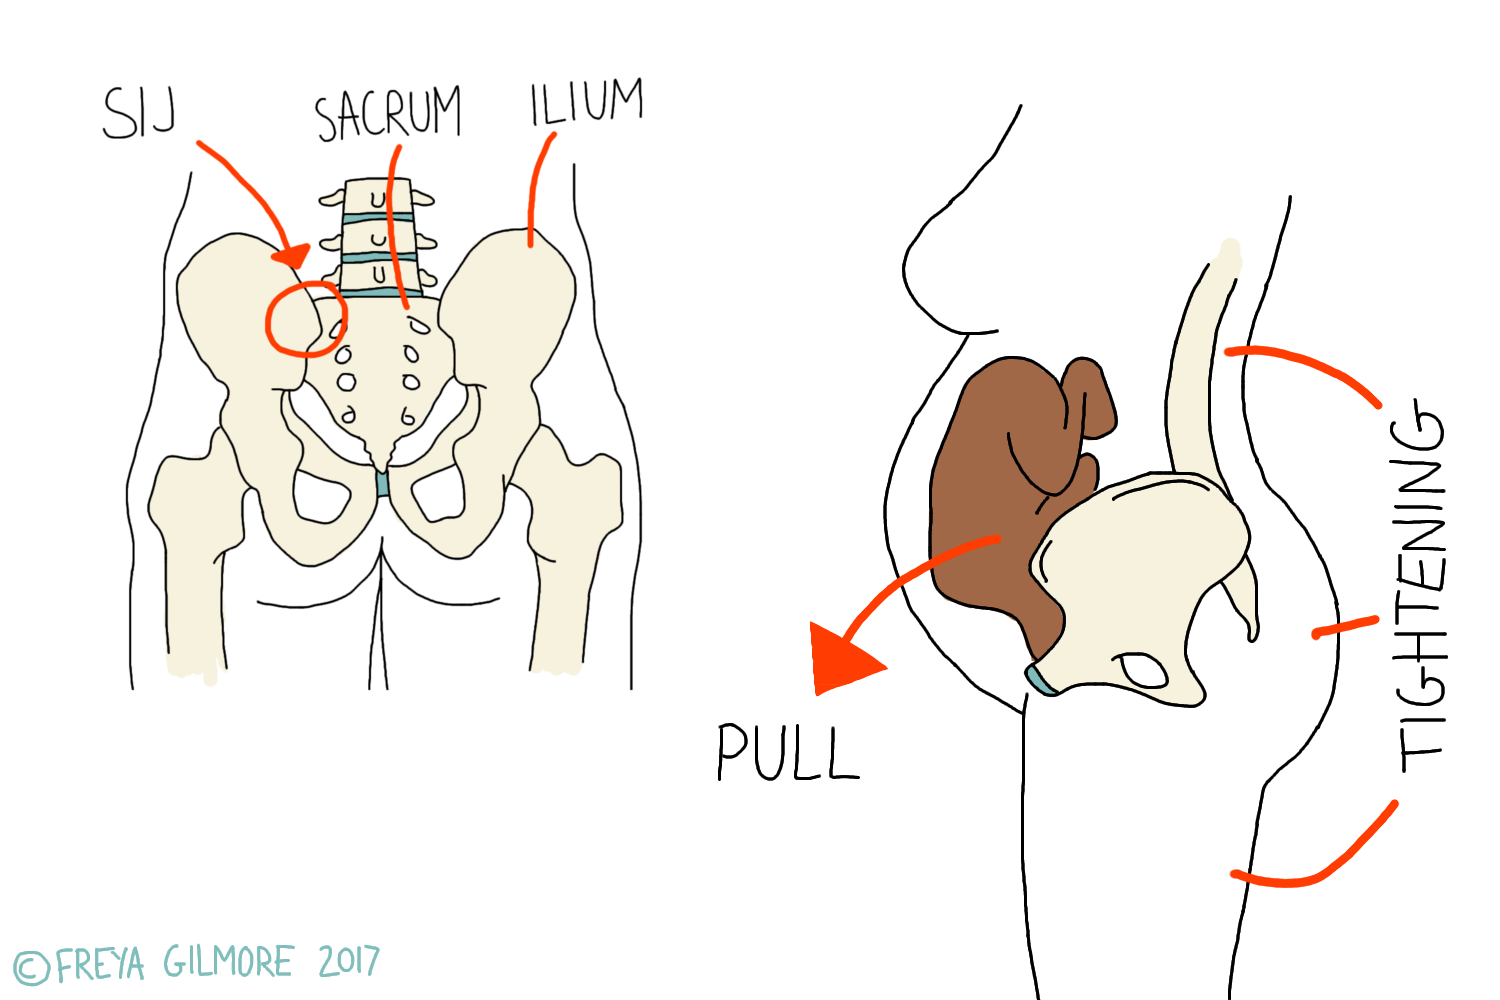 Side and back views of the pelvis in pregnancy